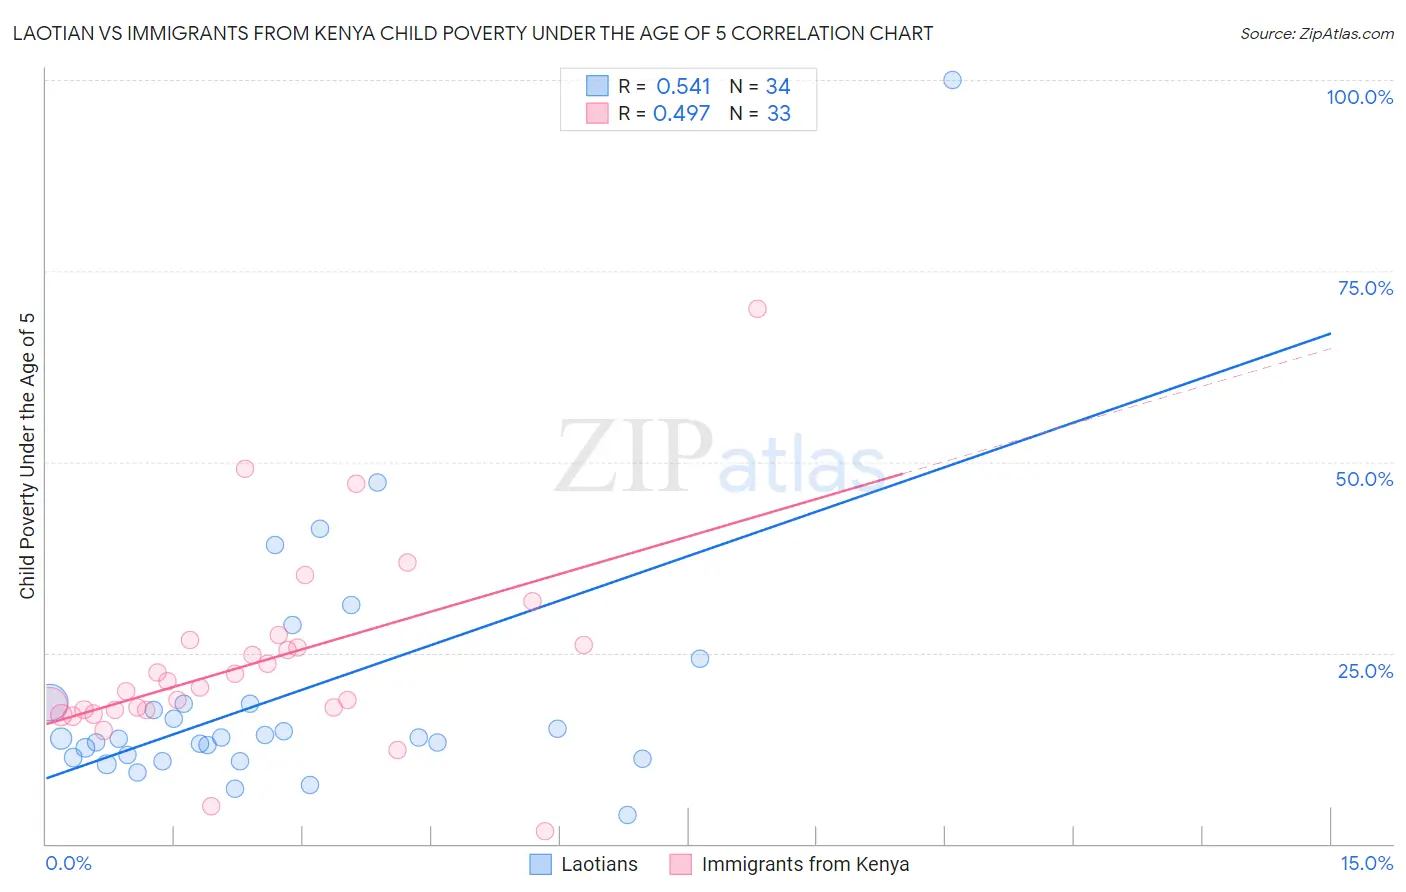 Laotian vs Immigrants from Kenya Child Poverty Under the Age of 5